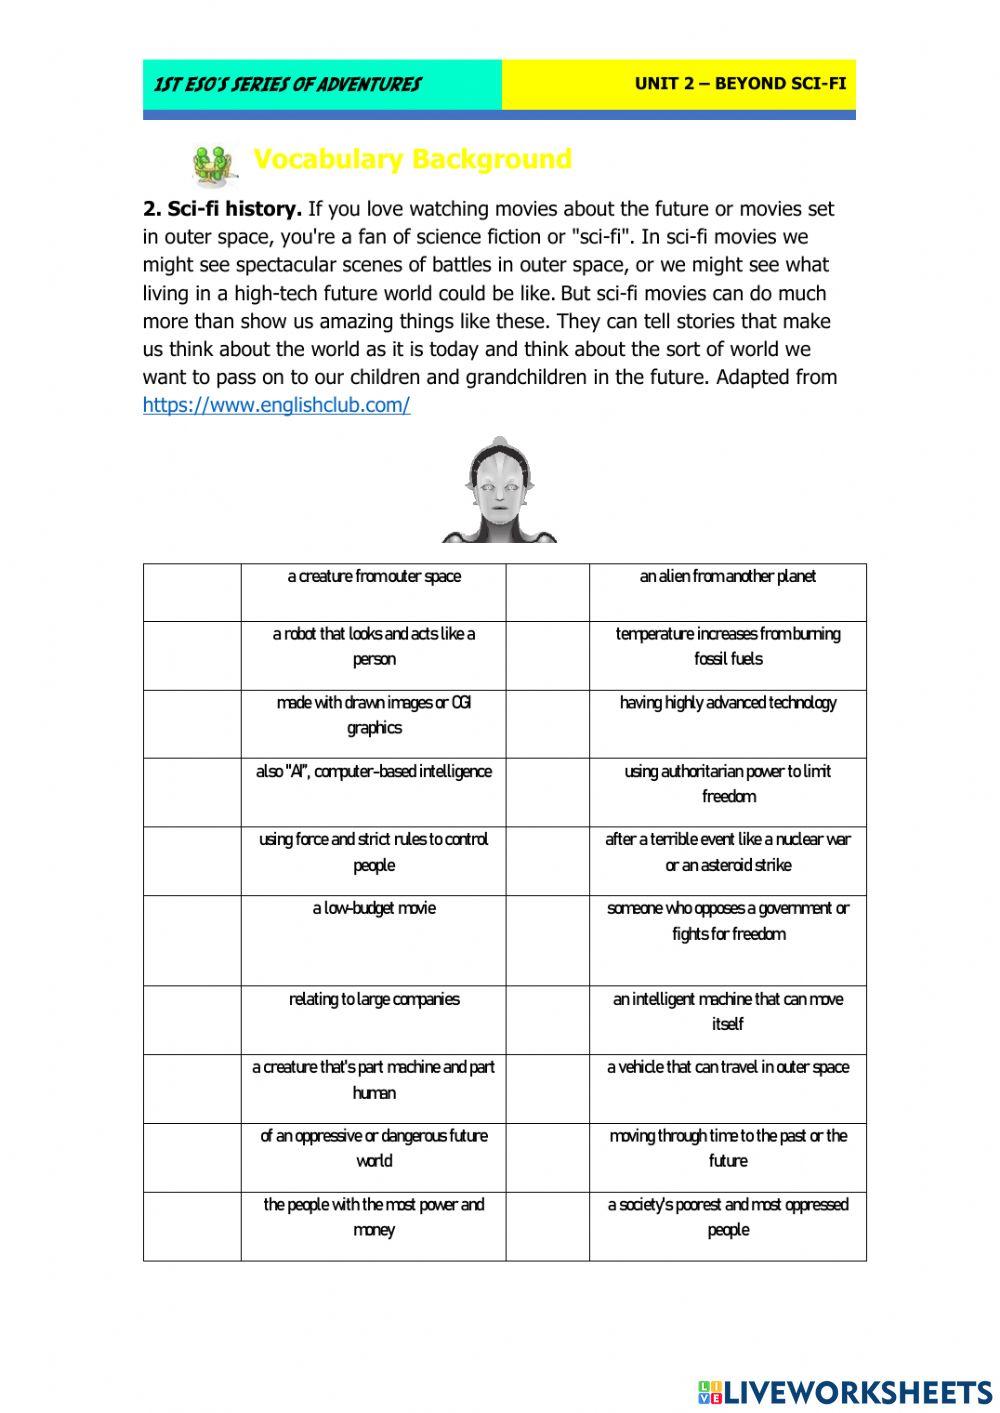 Sci-fi History Reading and Vocabulary worksheet | Live Worksheets